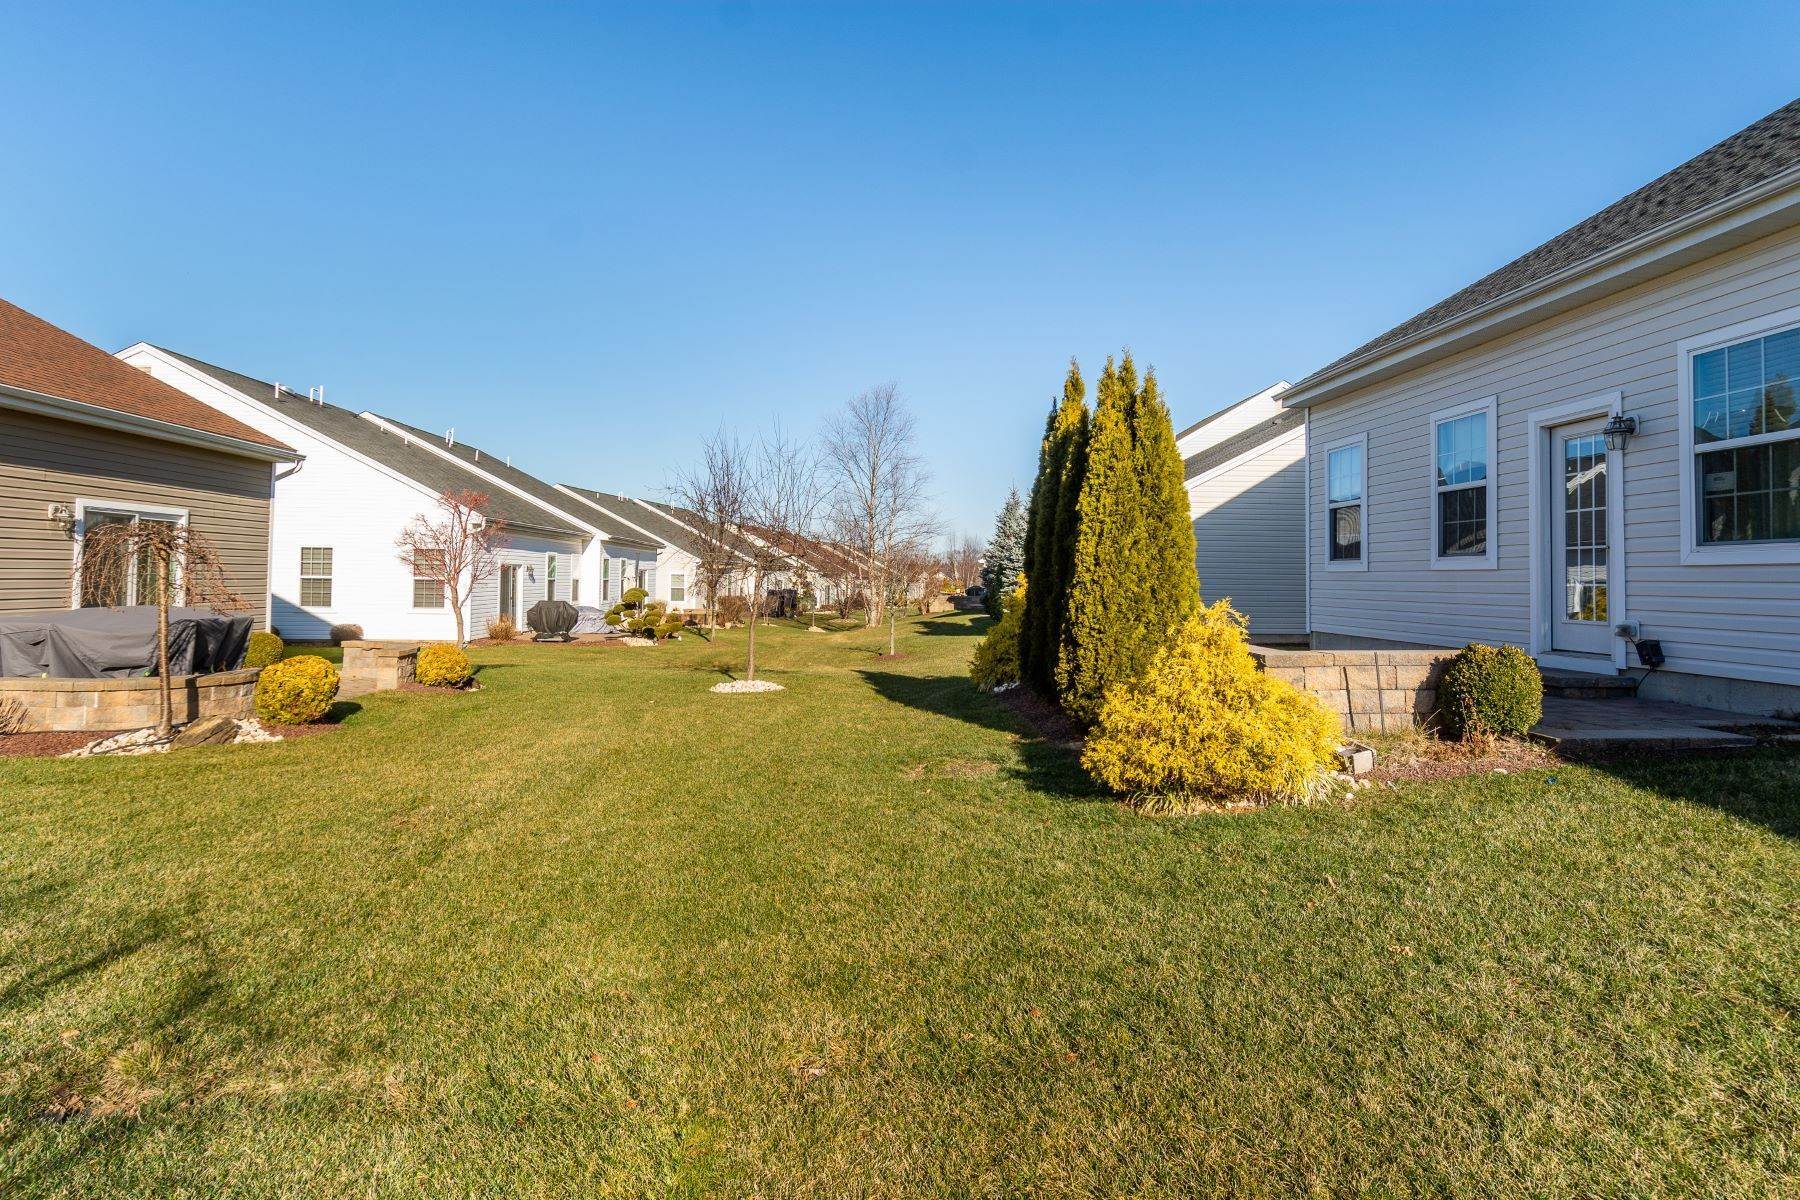 42. Single Family Homes for Sale at Tons of Amenities, Plenty of Personal Space 34 Constitution Drive, Monroe Township, New Jersey 08831 United States